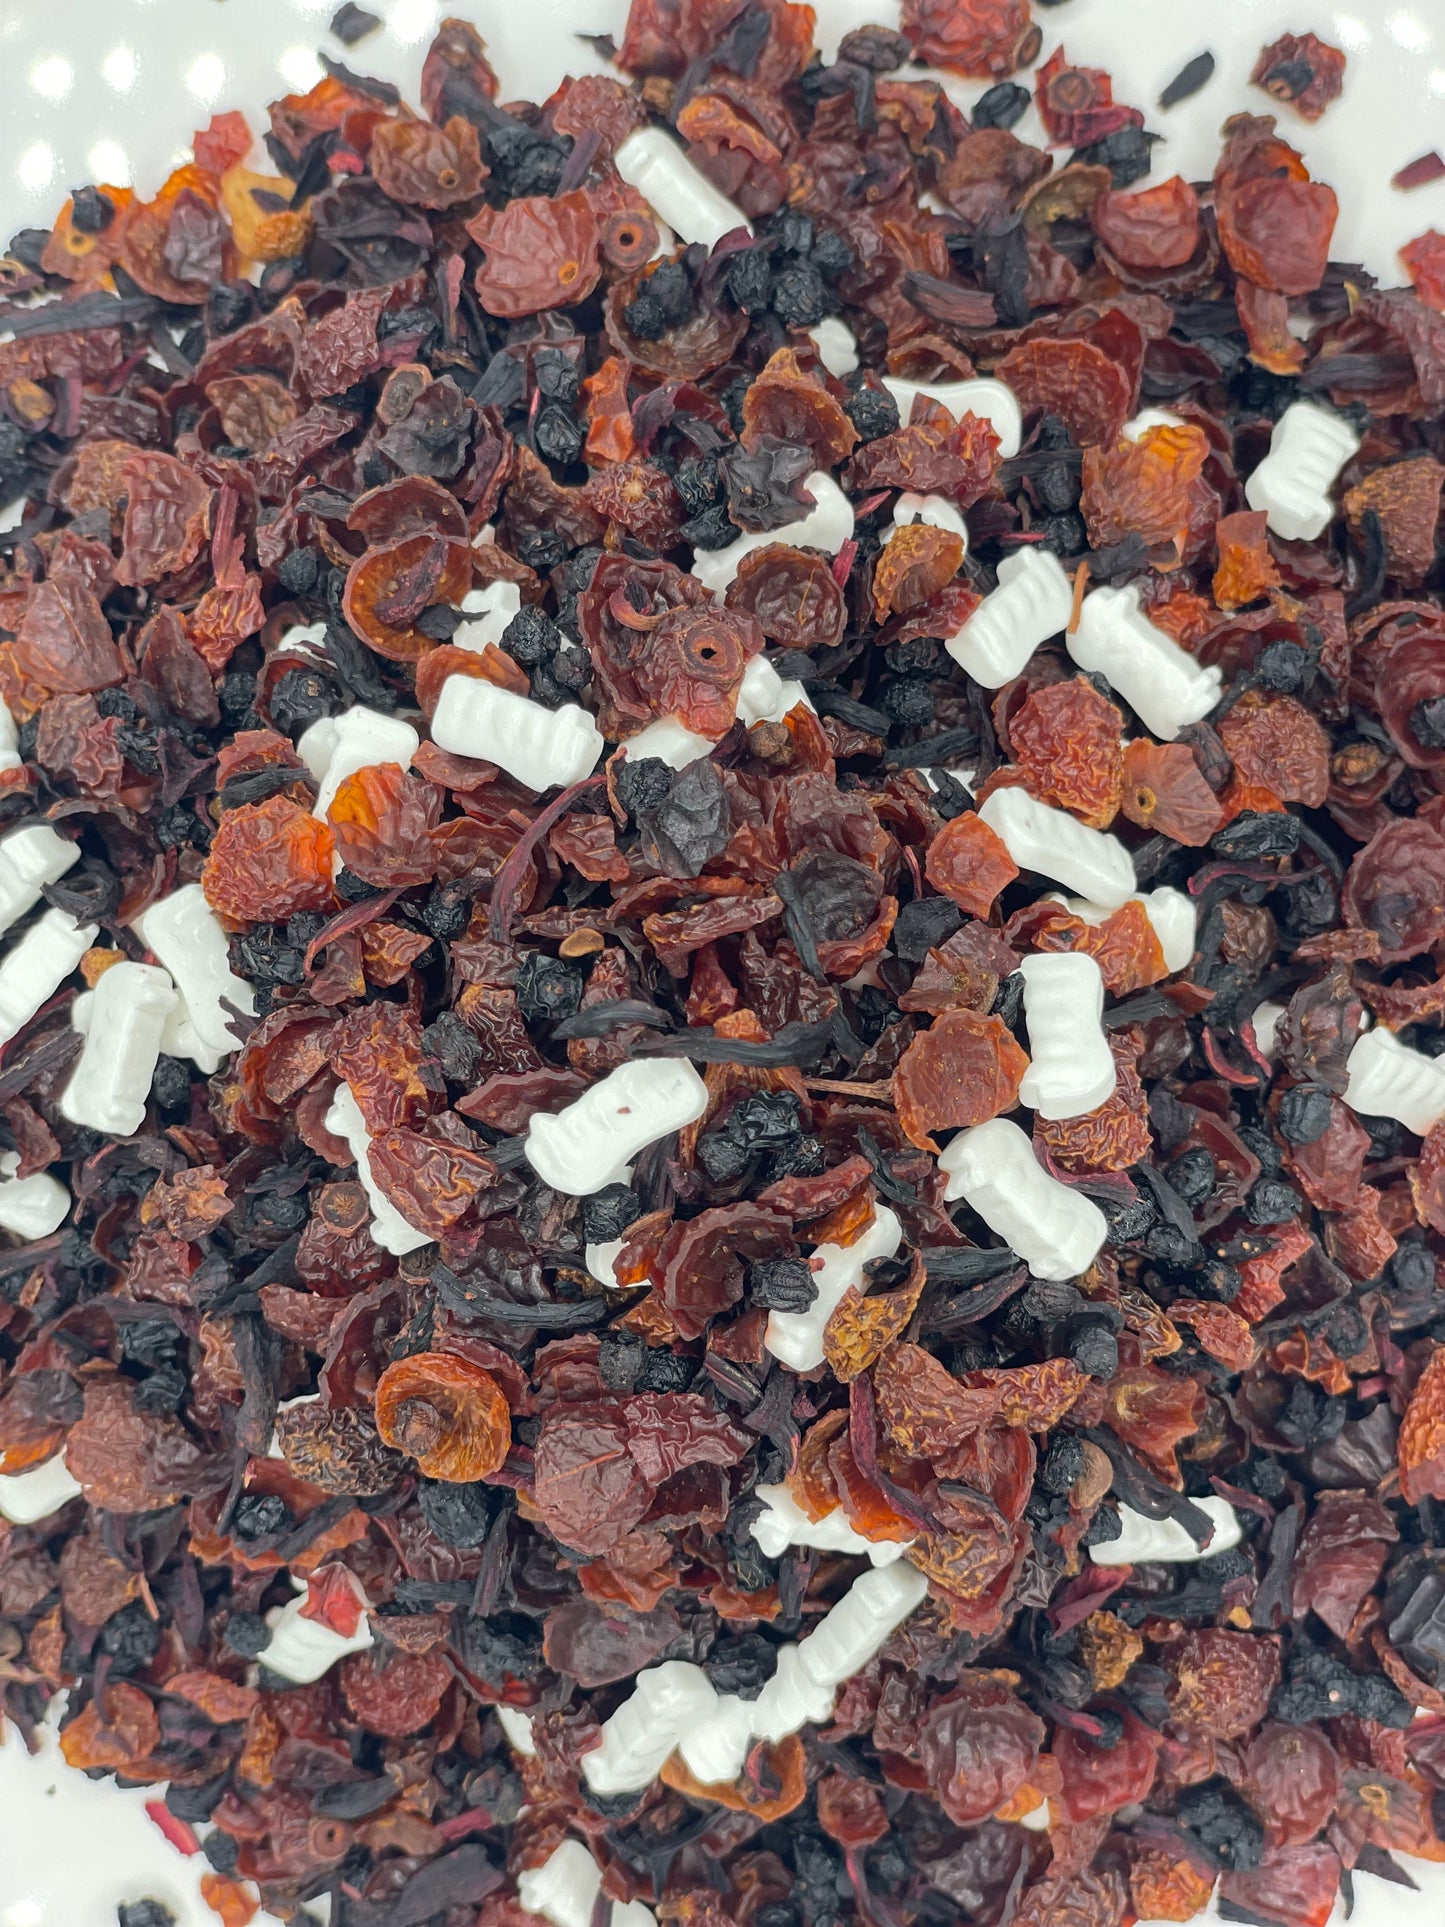 Witchy Pooh's Vampire's Kiss Loose Leaf Fruit Elderberry Herbal Tea with Candy Vampire Teeth, Caffeine Free-19